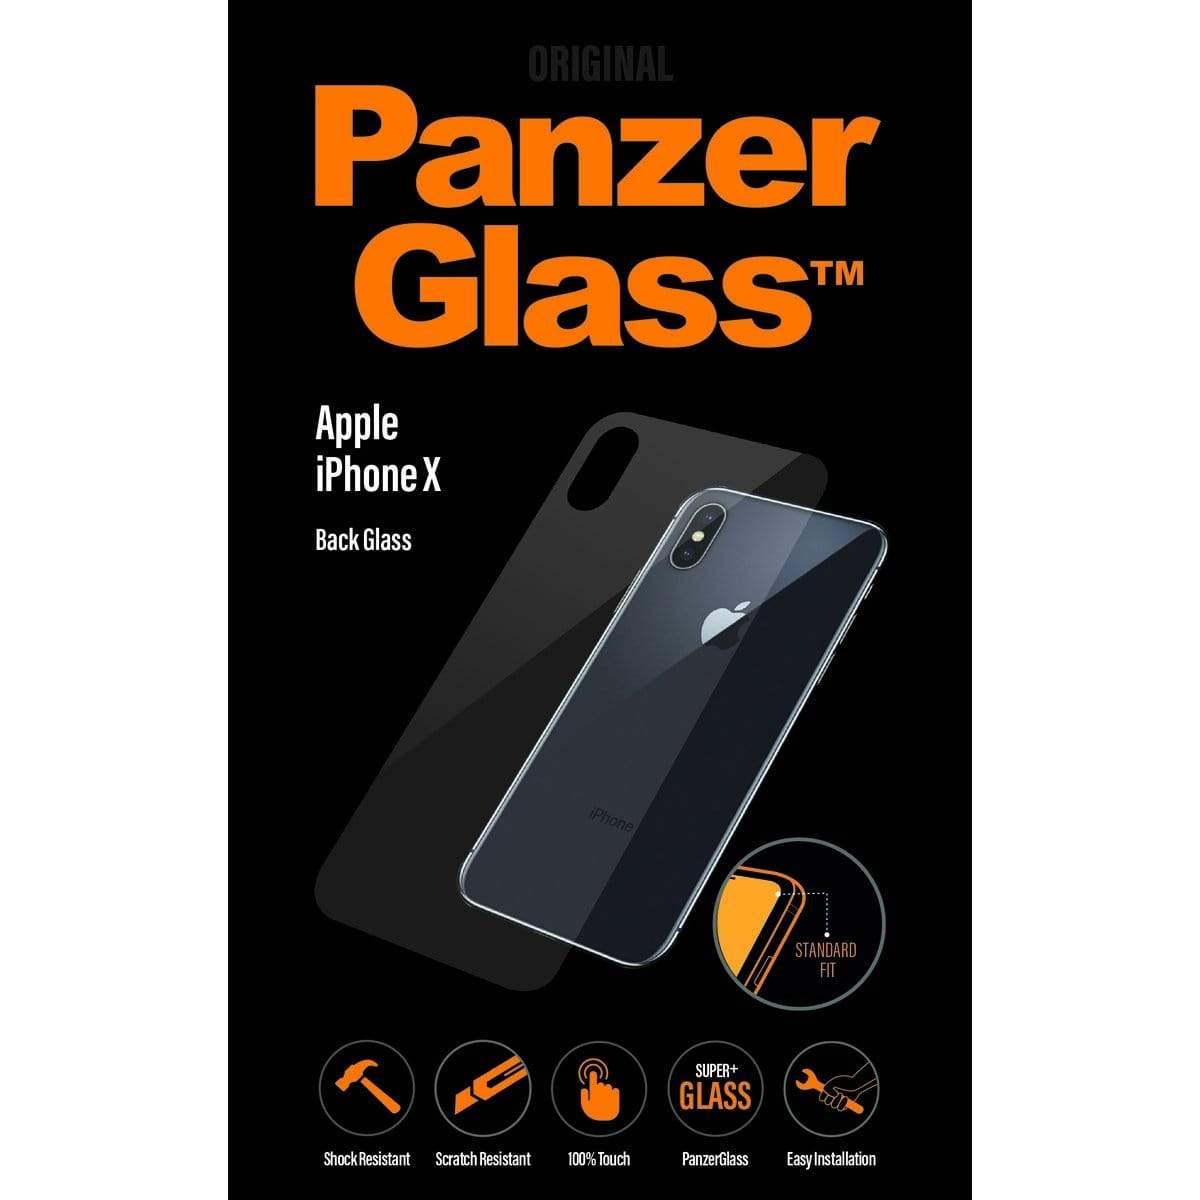 panzerglass back glass screen protector for iphone xs x